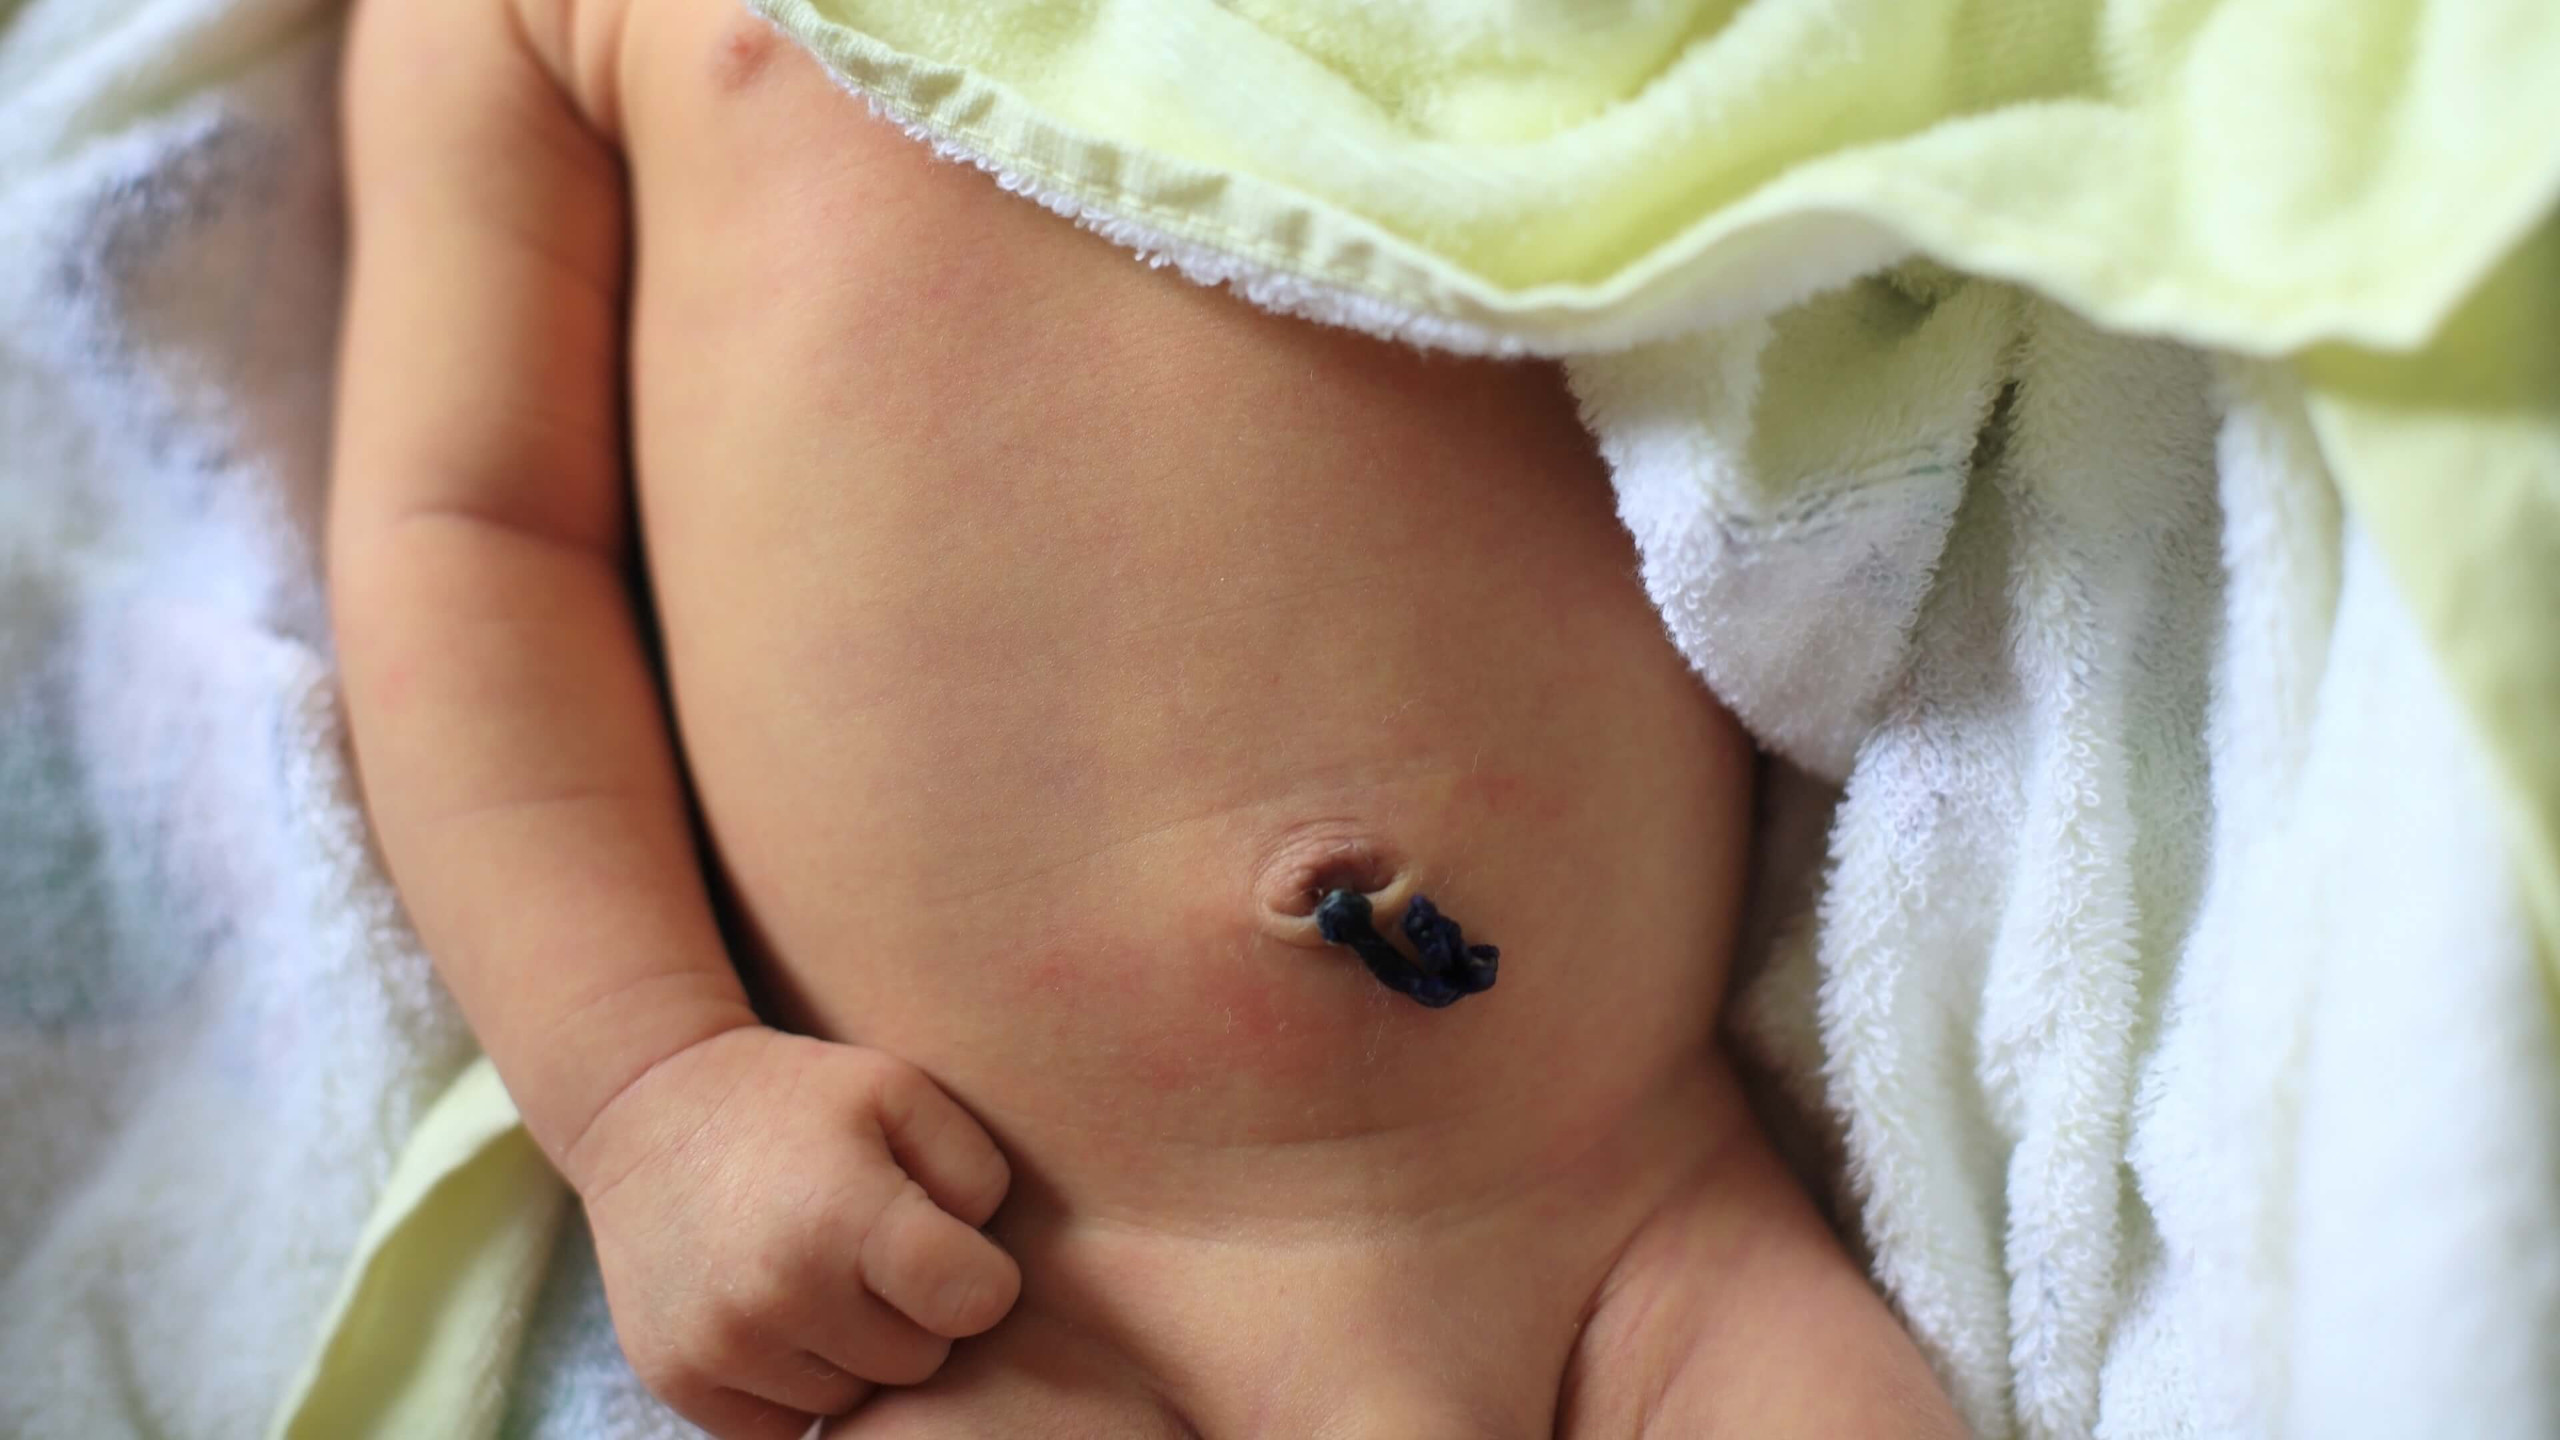 How Do You Take Care of a Newborn's Belly Button? - GoodRx